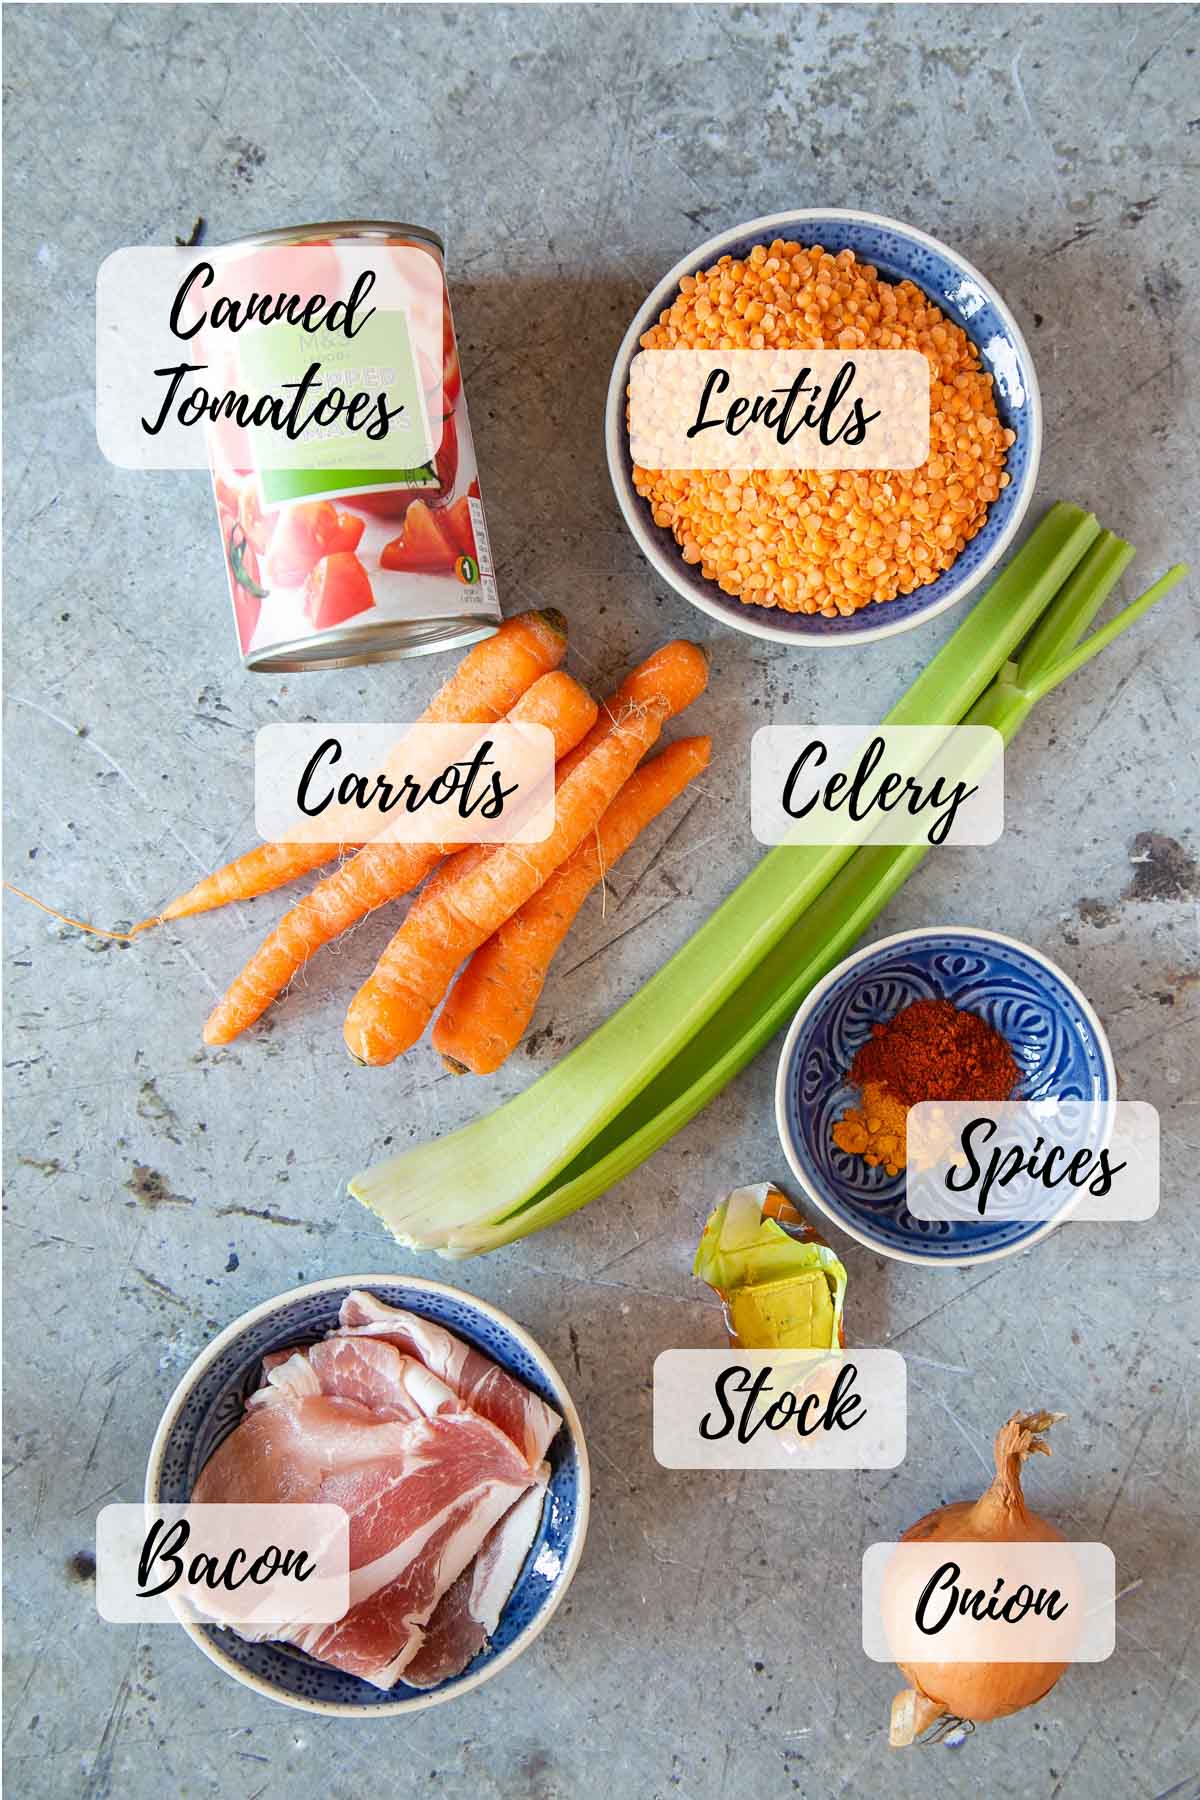 The ingredients - a tin of tomatoes, red lentils, celery, spices, stock, onion, bacon, carrots.